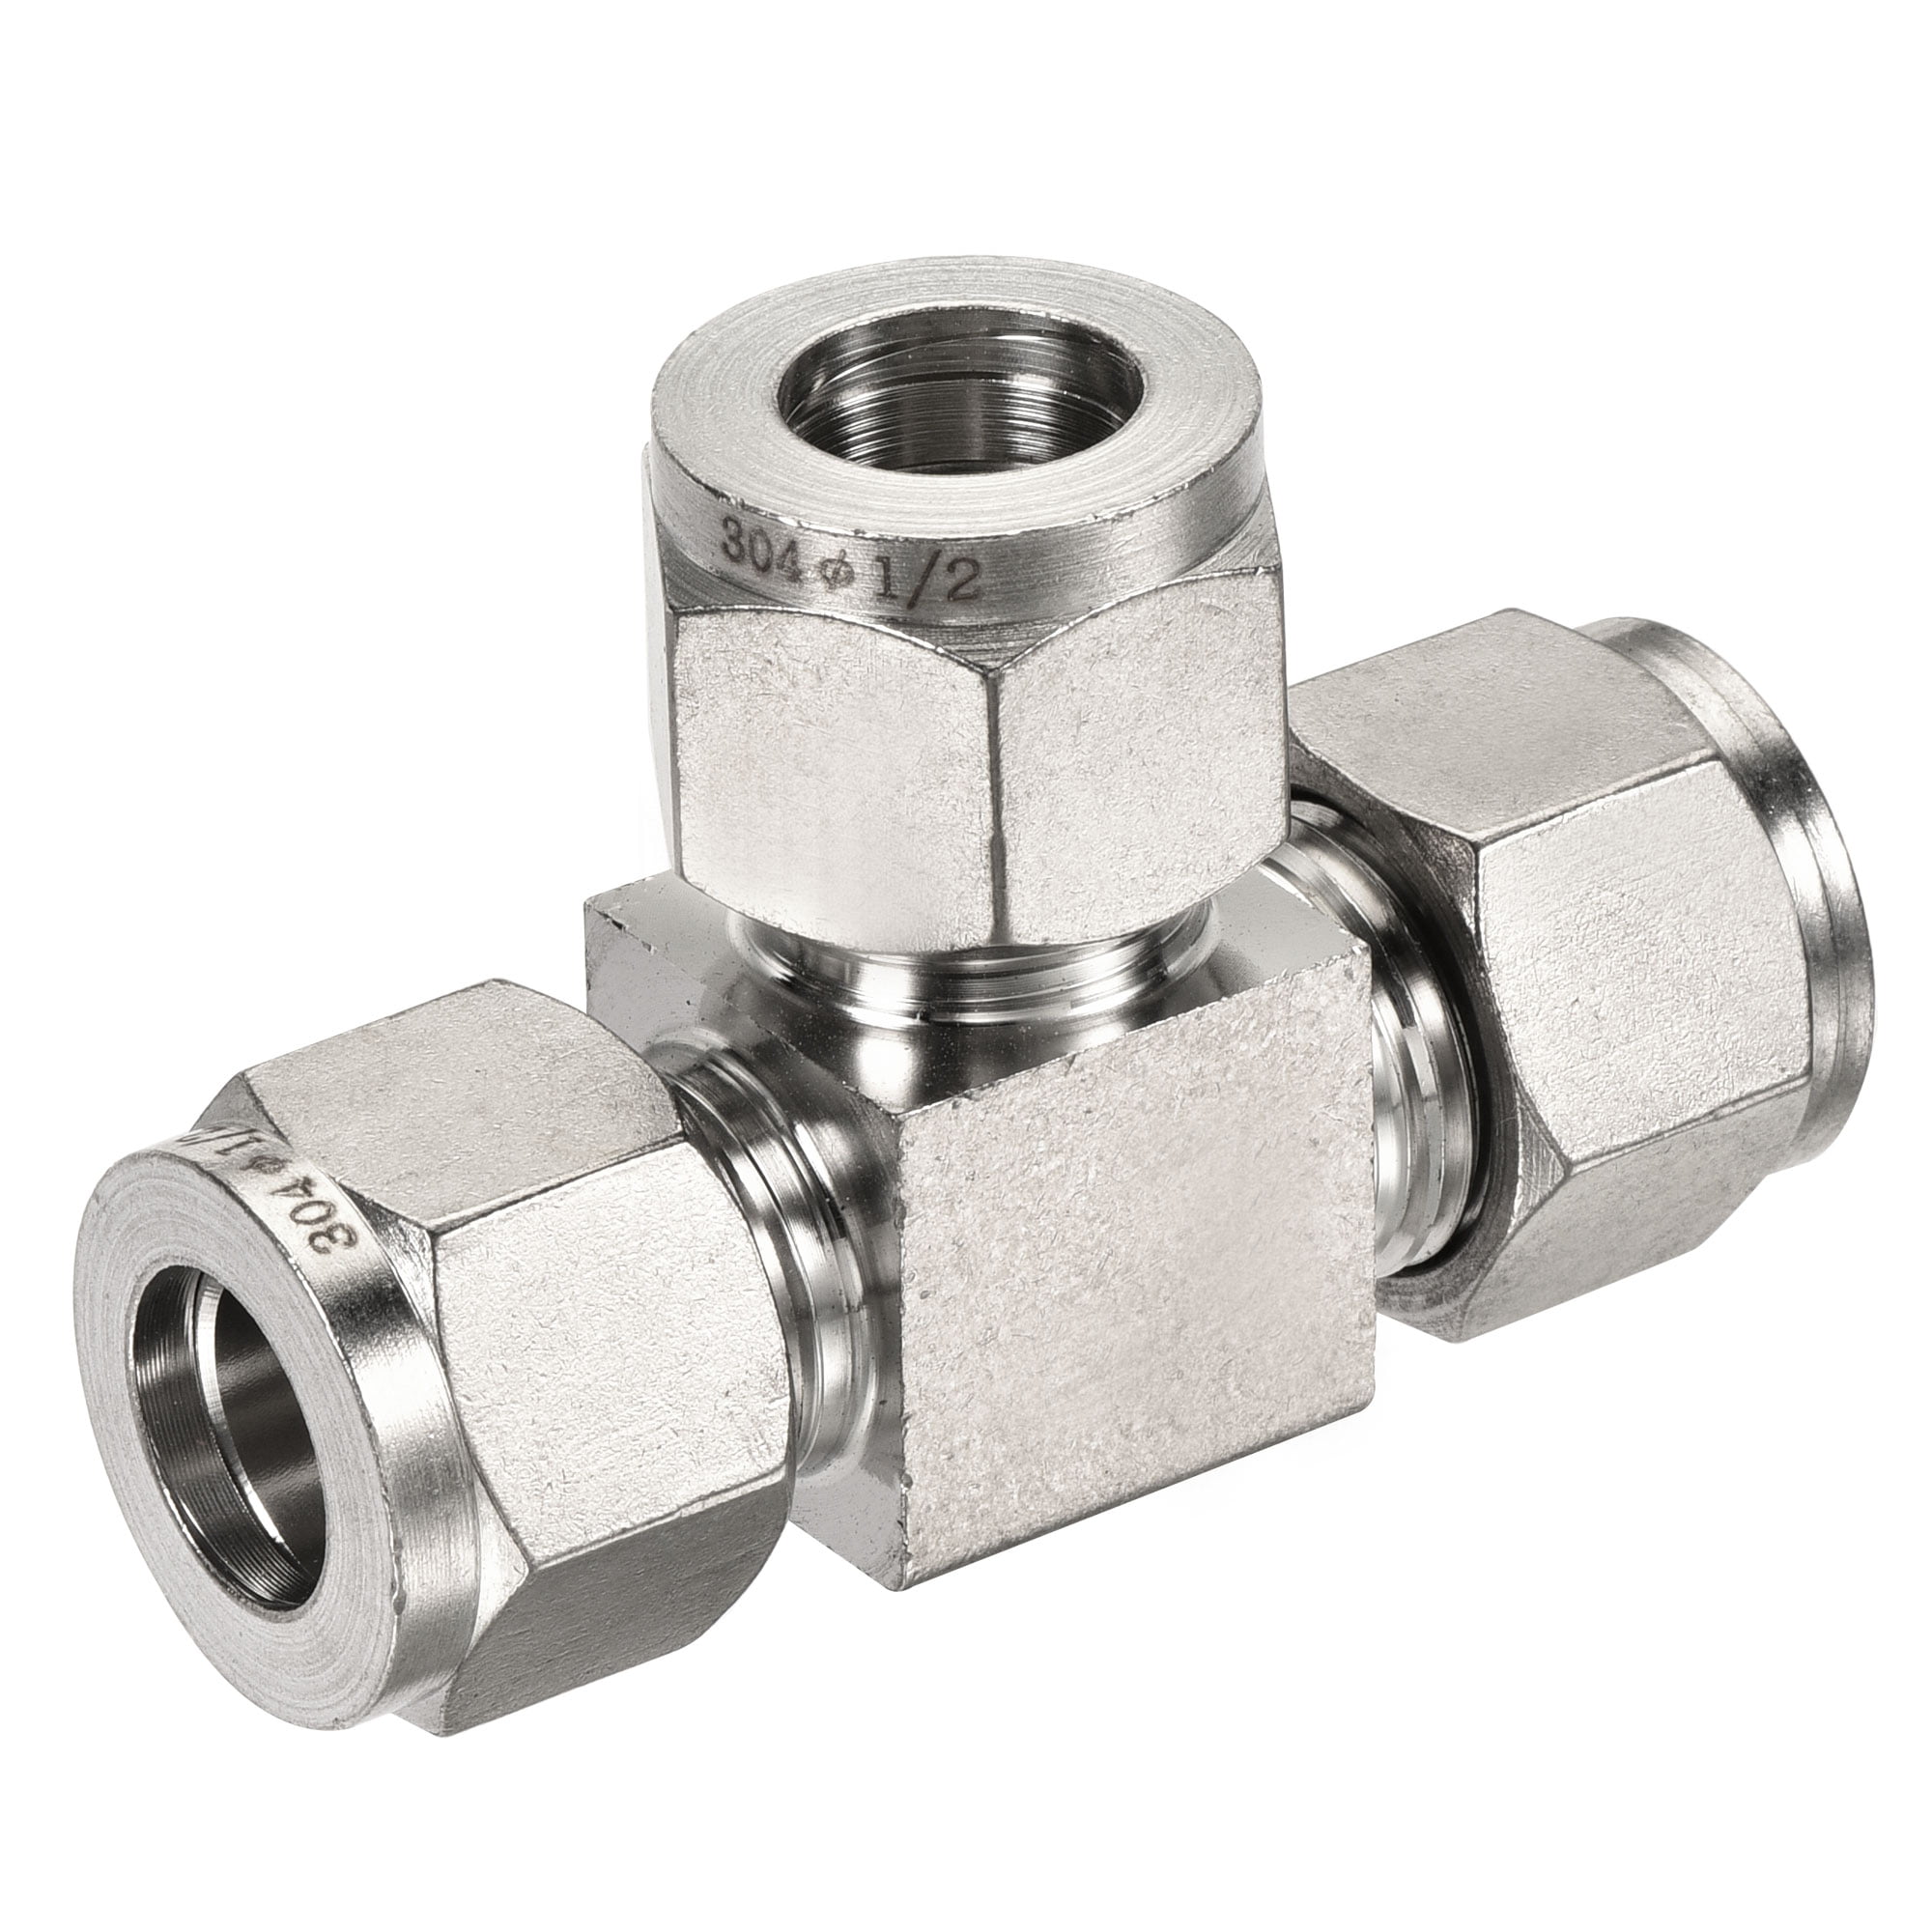 Reducing Union Tee Tube Fittings · Apex Industrial Solutions